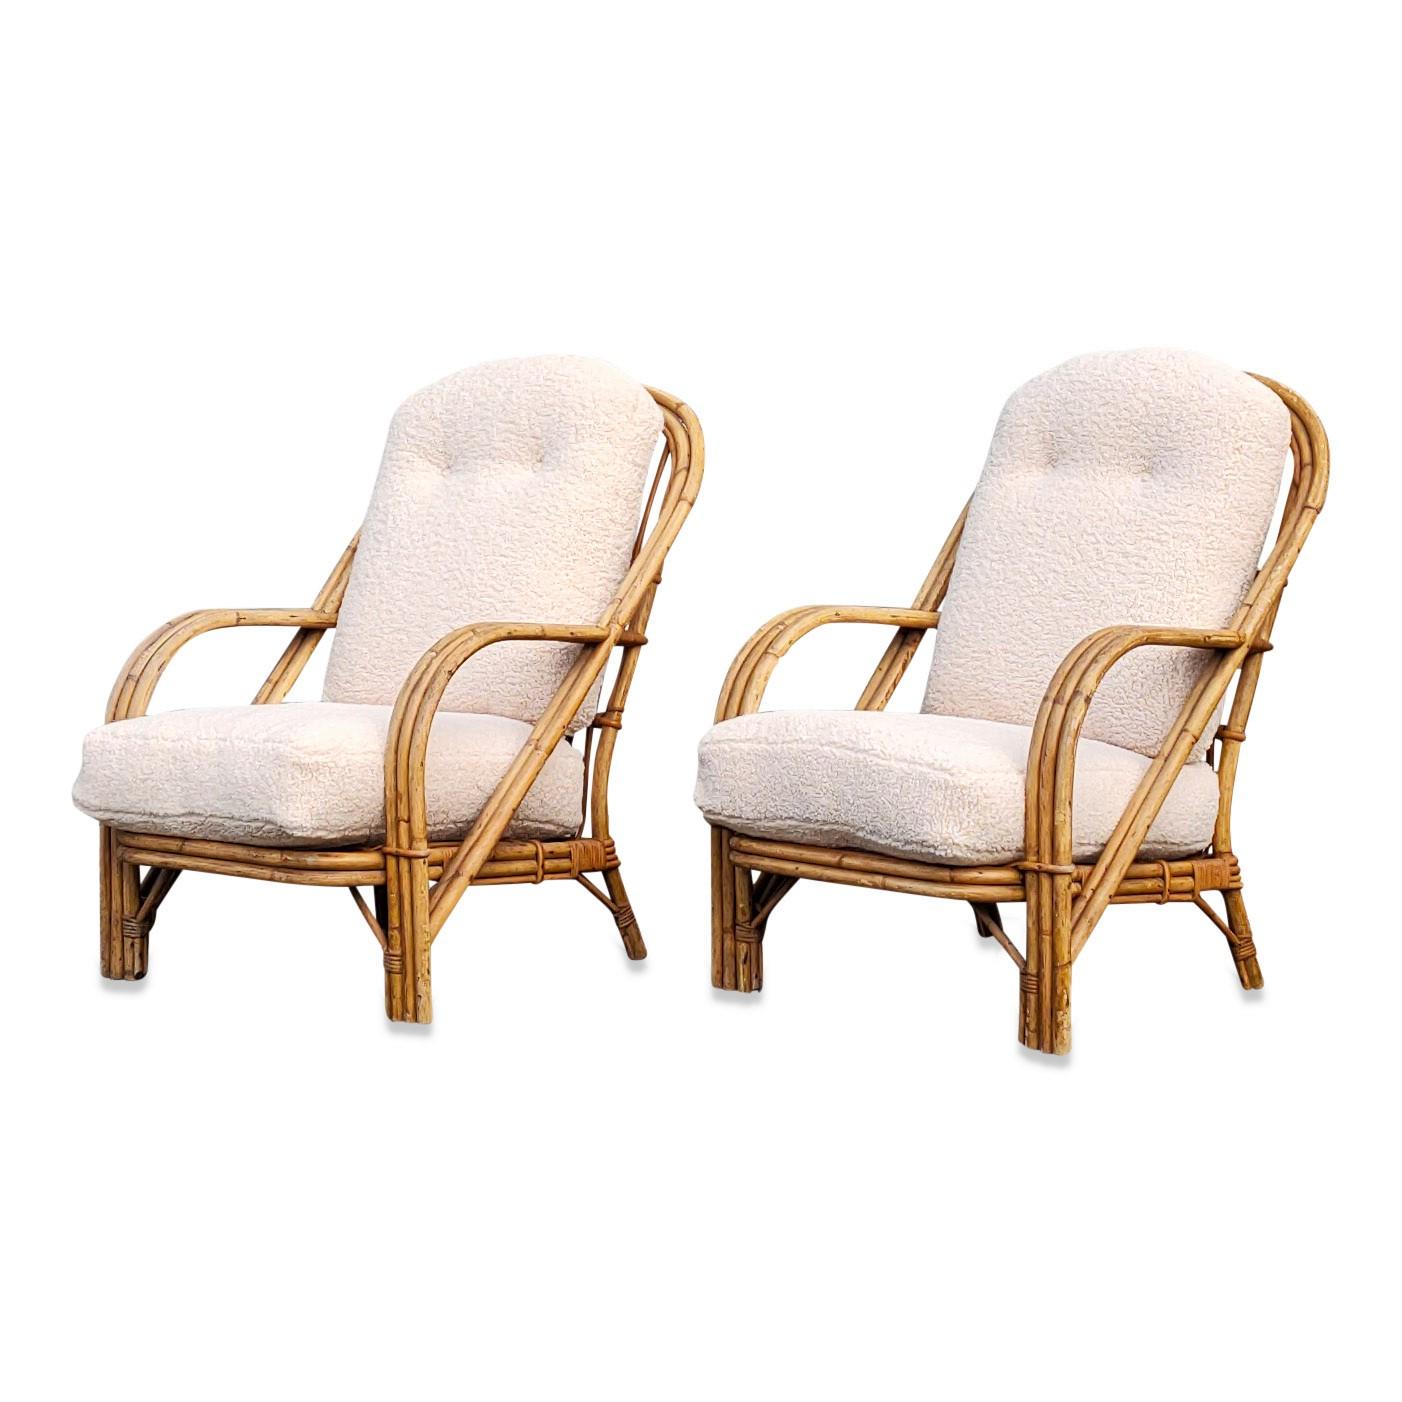 Mid-Century Modern Pair of Wicker Armchairs by Audoux Minnet, France, 1960s